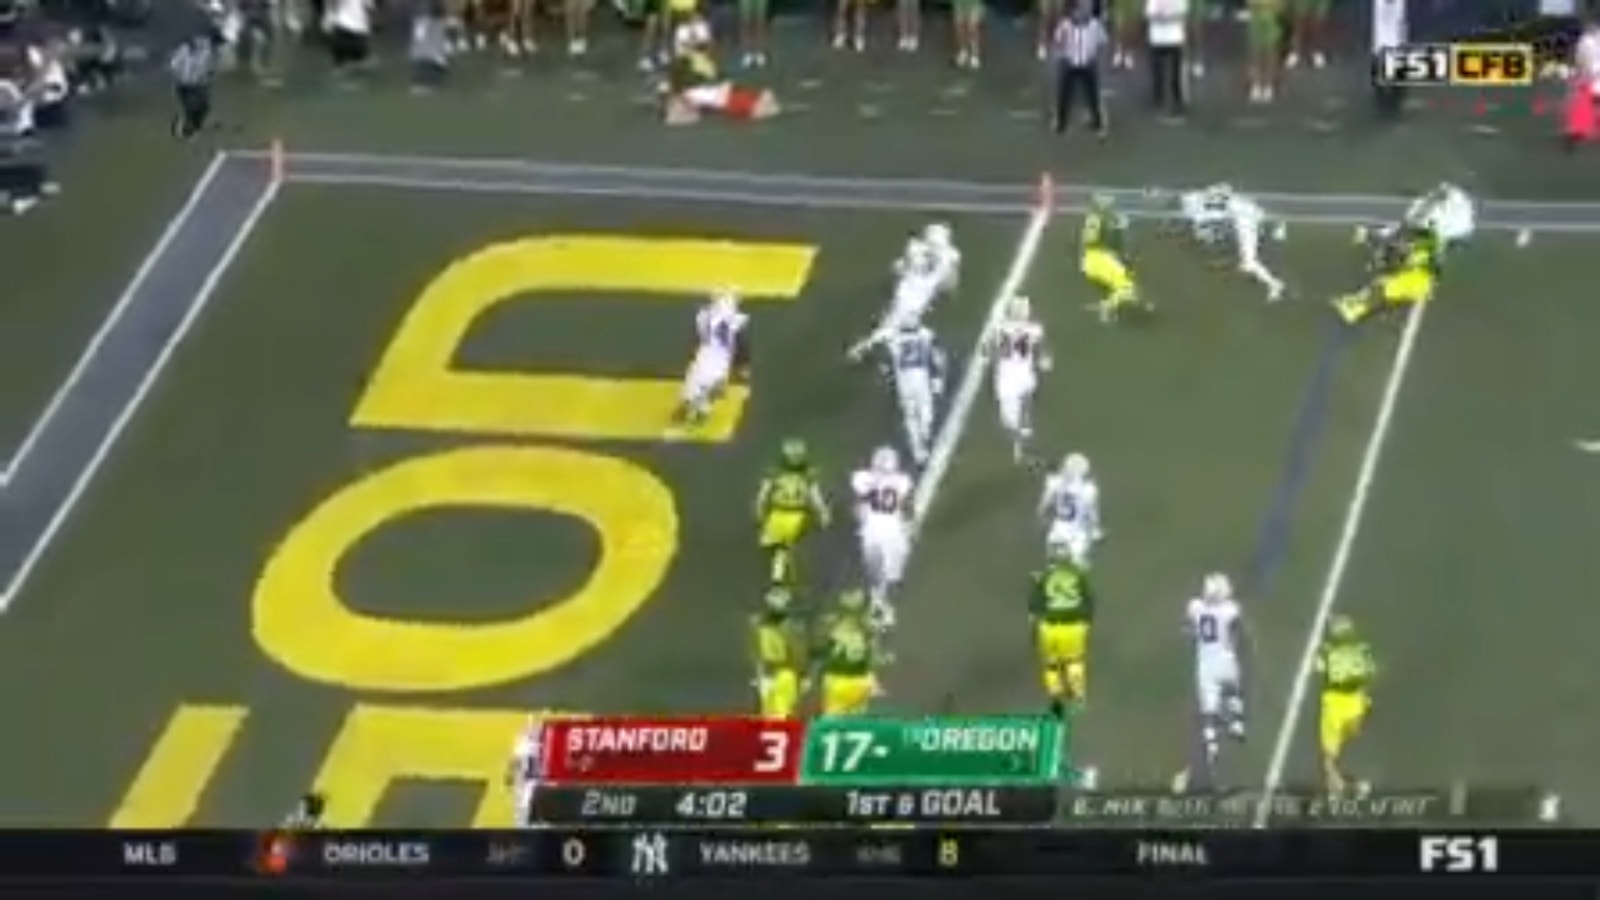 Oregon's Bo Nix takes it in himself for the 4-yard touchdown